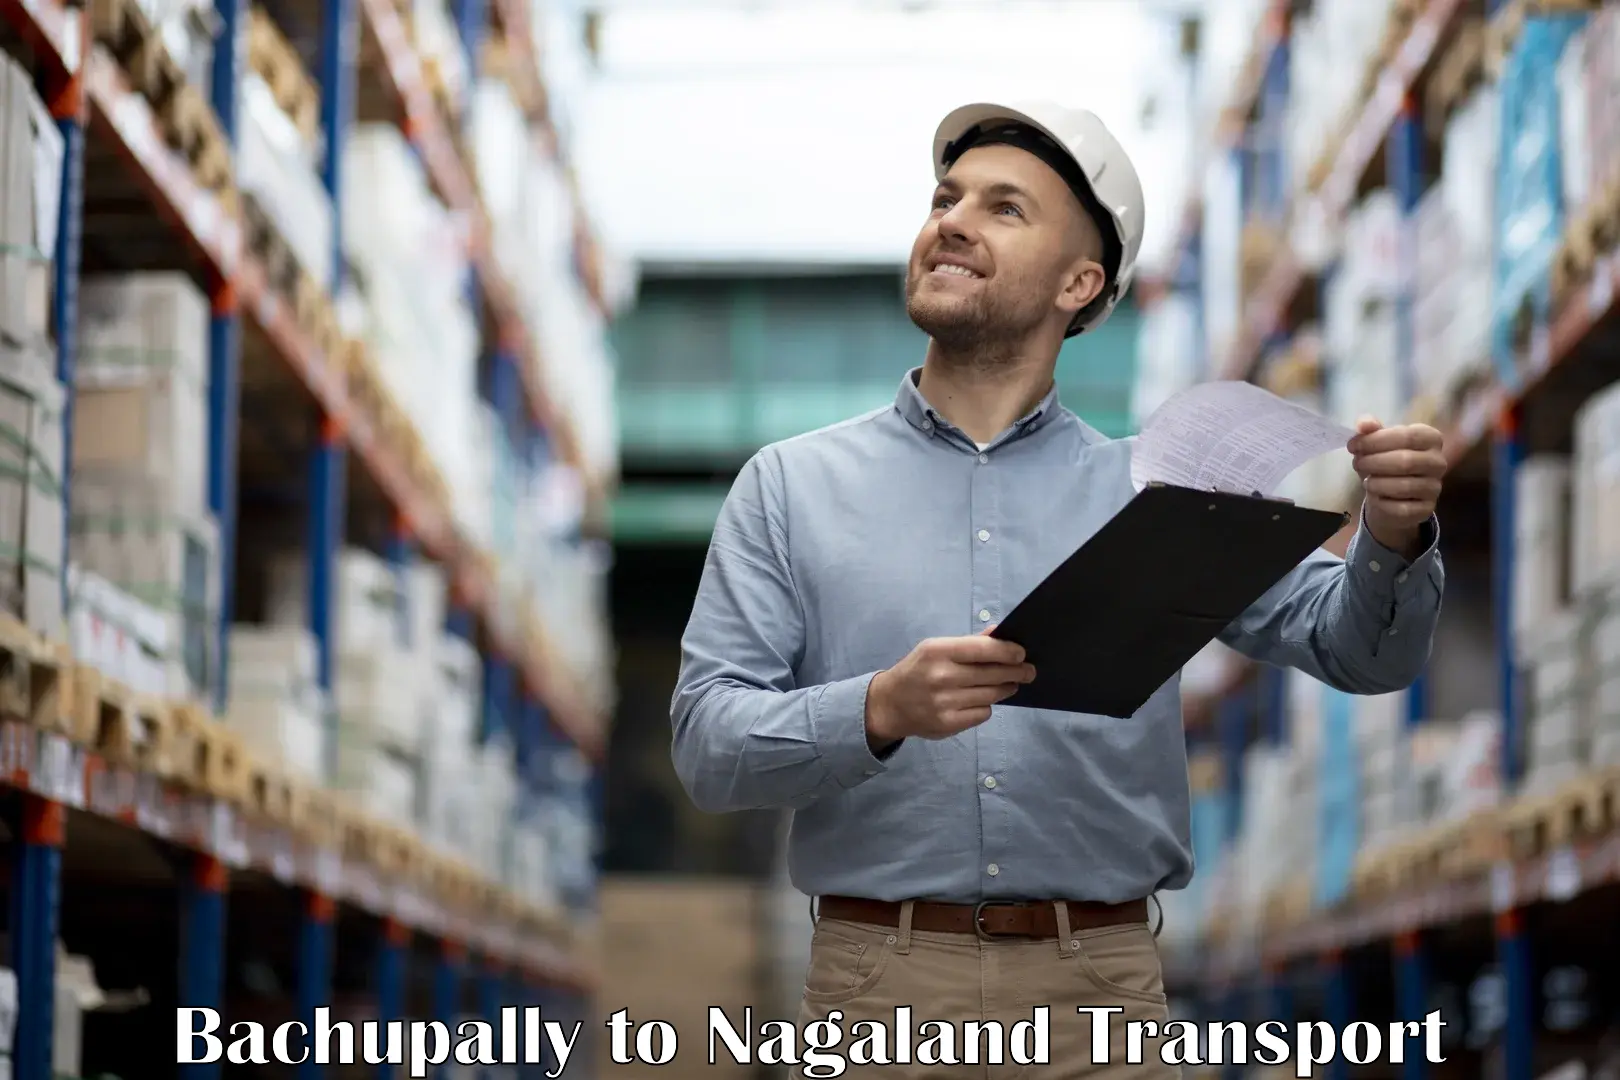 Truck transport companies in India Bachupally to Nagaland